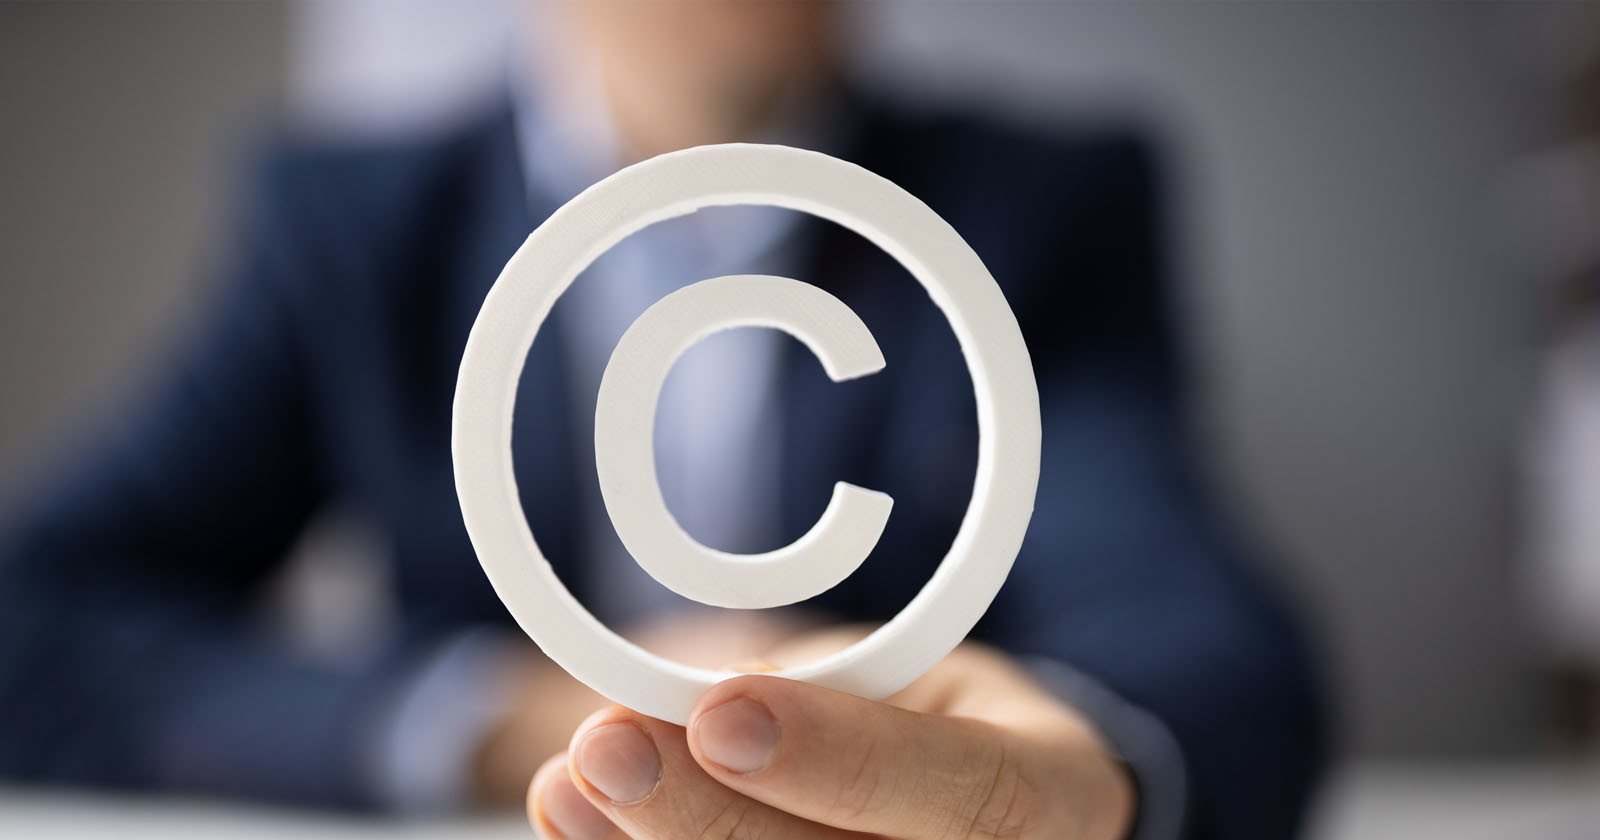 Dreamstime Takes Alternative Approach to Copyright Theft